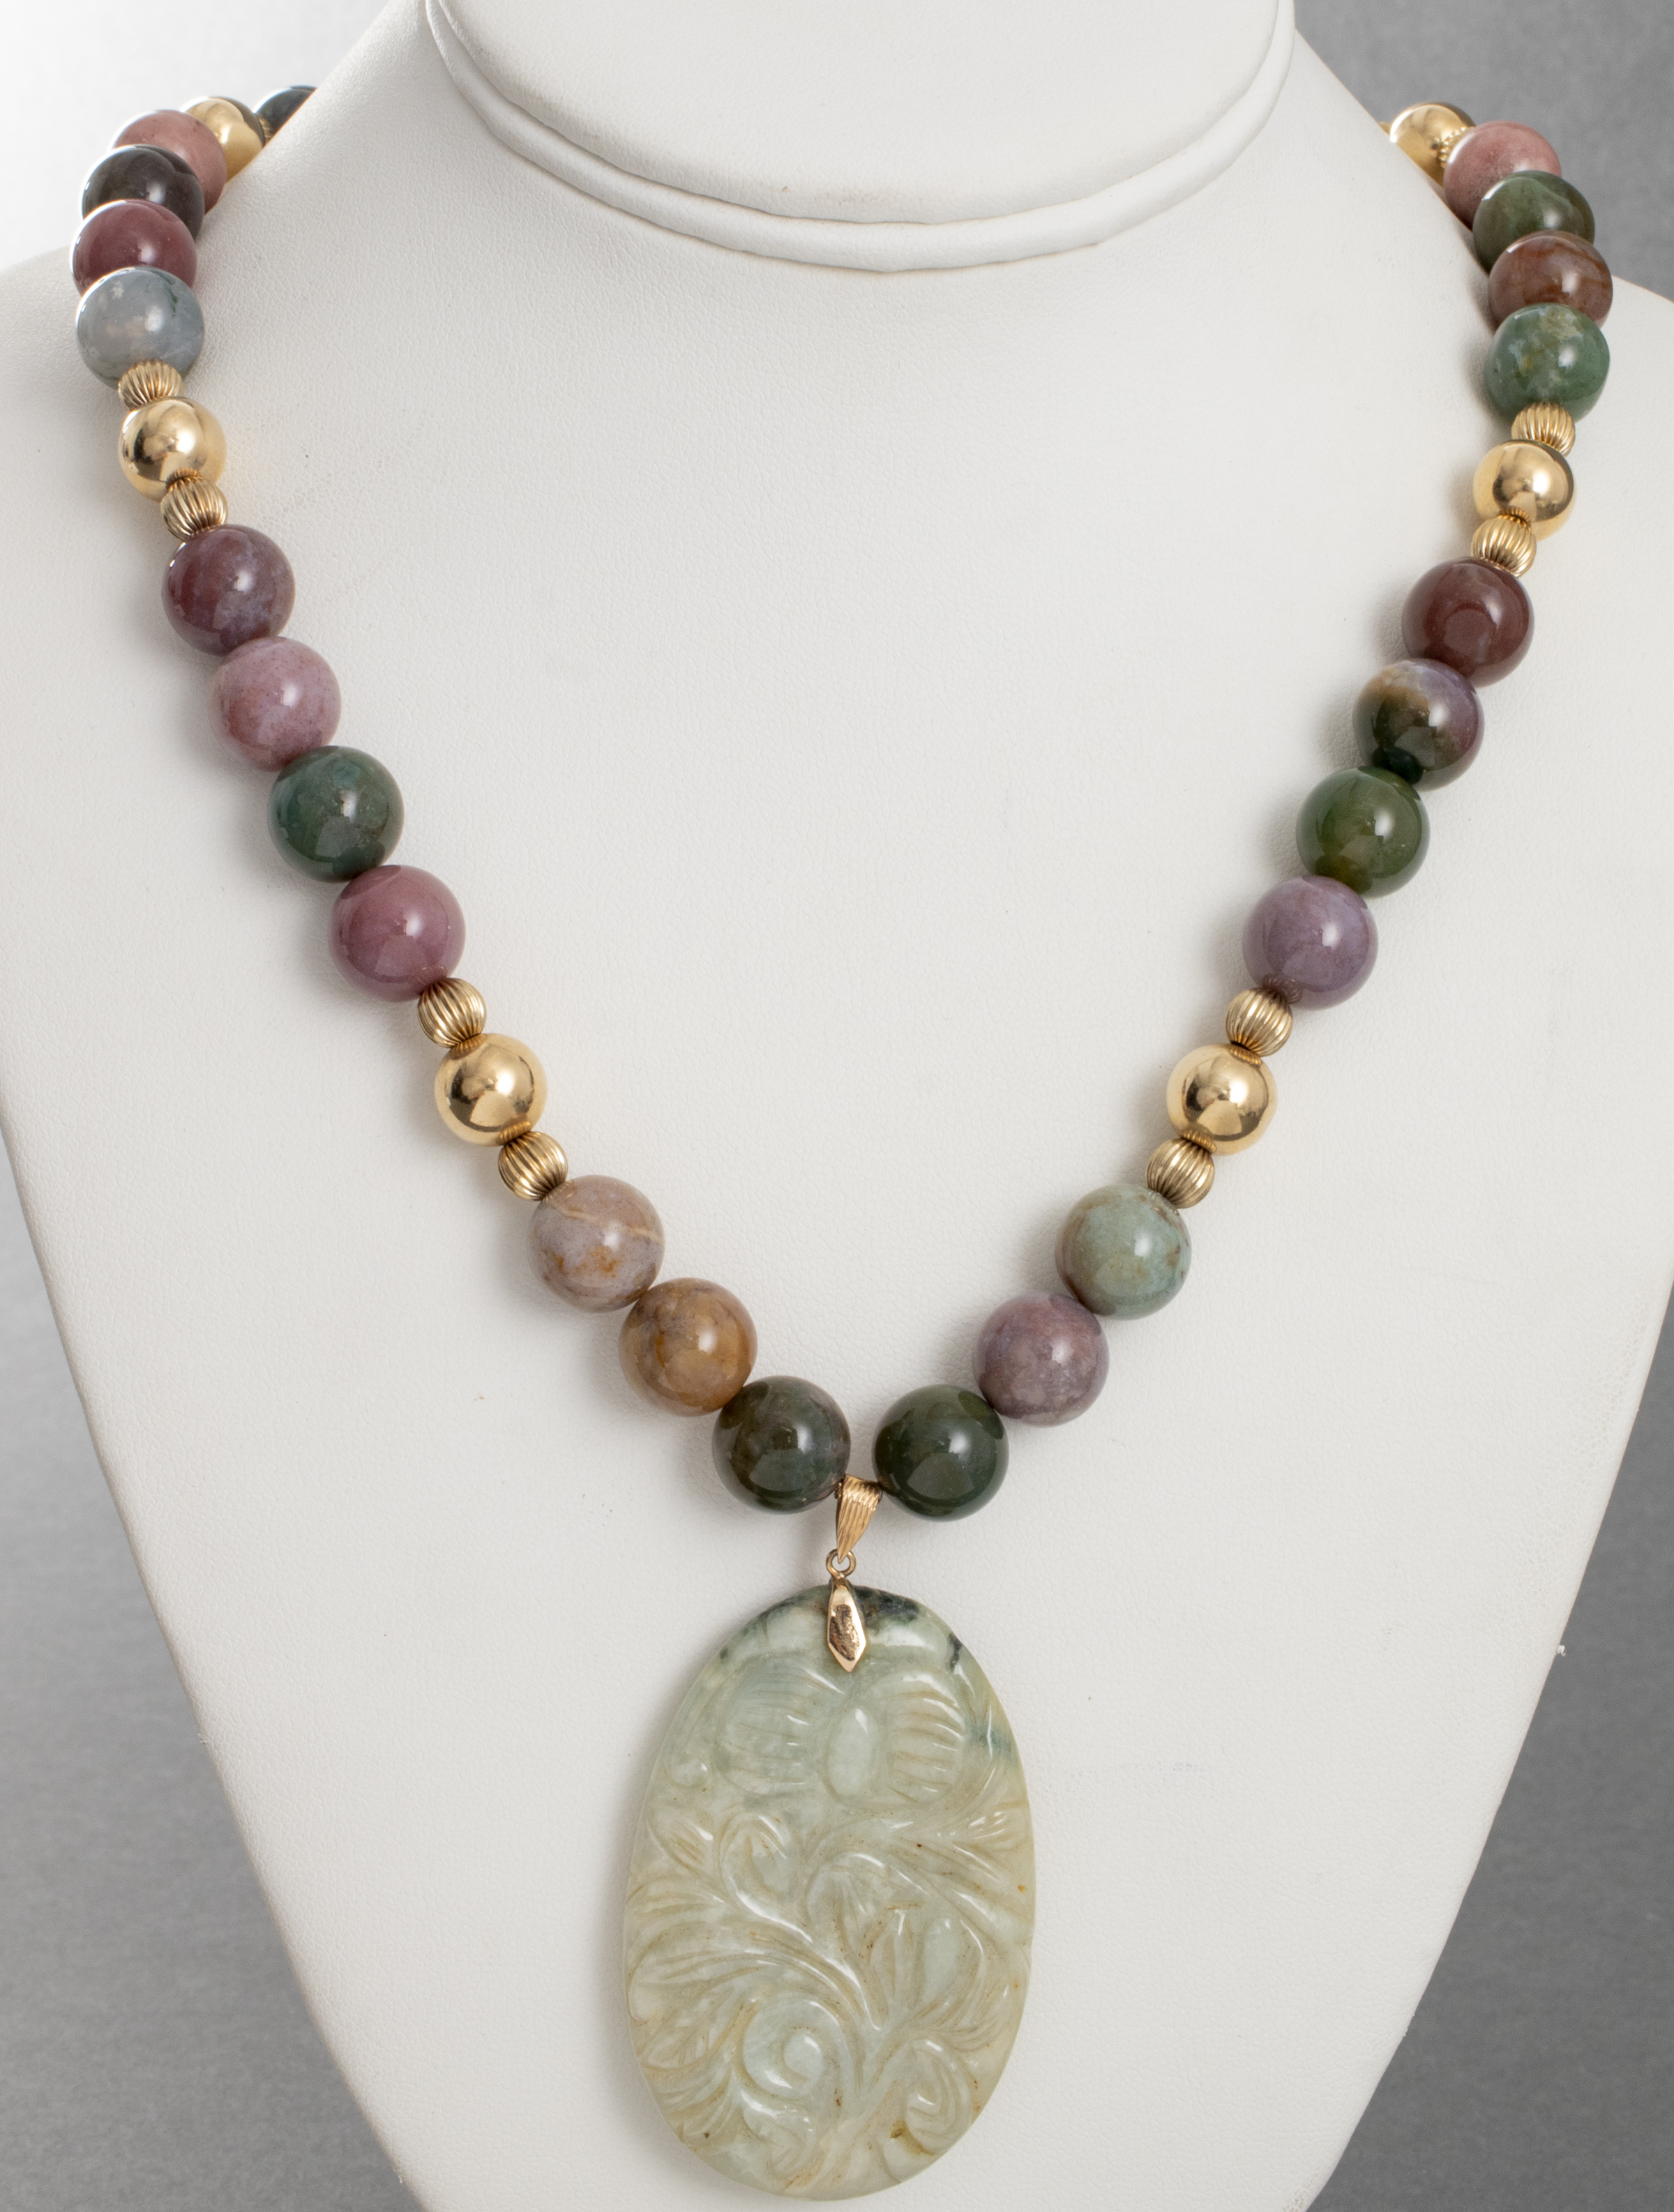 CARVED JADE COLORED STONE PENDANT